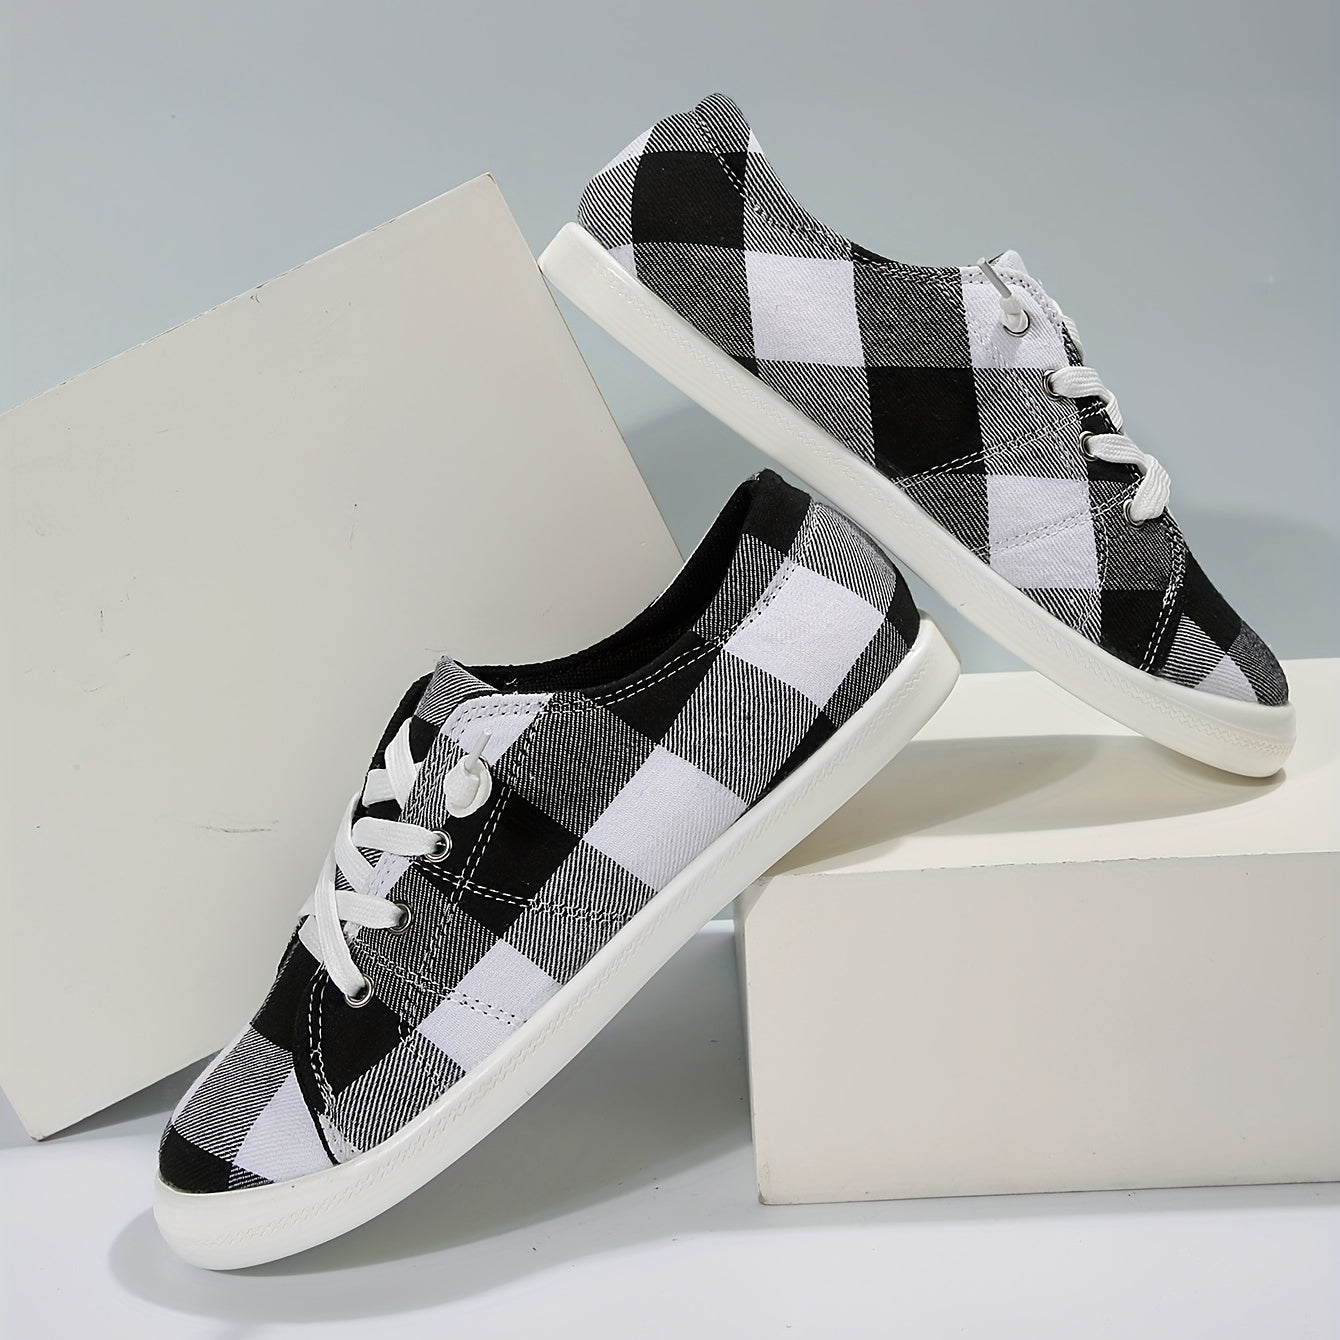 Women's Colorblock Plaid Pattern Shoes, Slip On Low-top Round Toe Non-slip Outdoor Canvas Shoes, Casual Daily Shoes